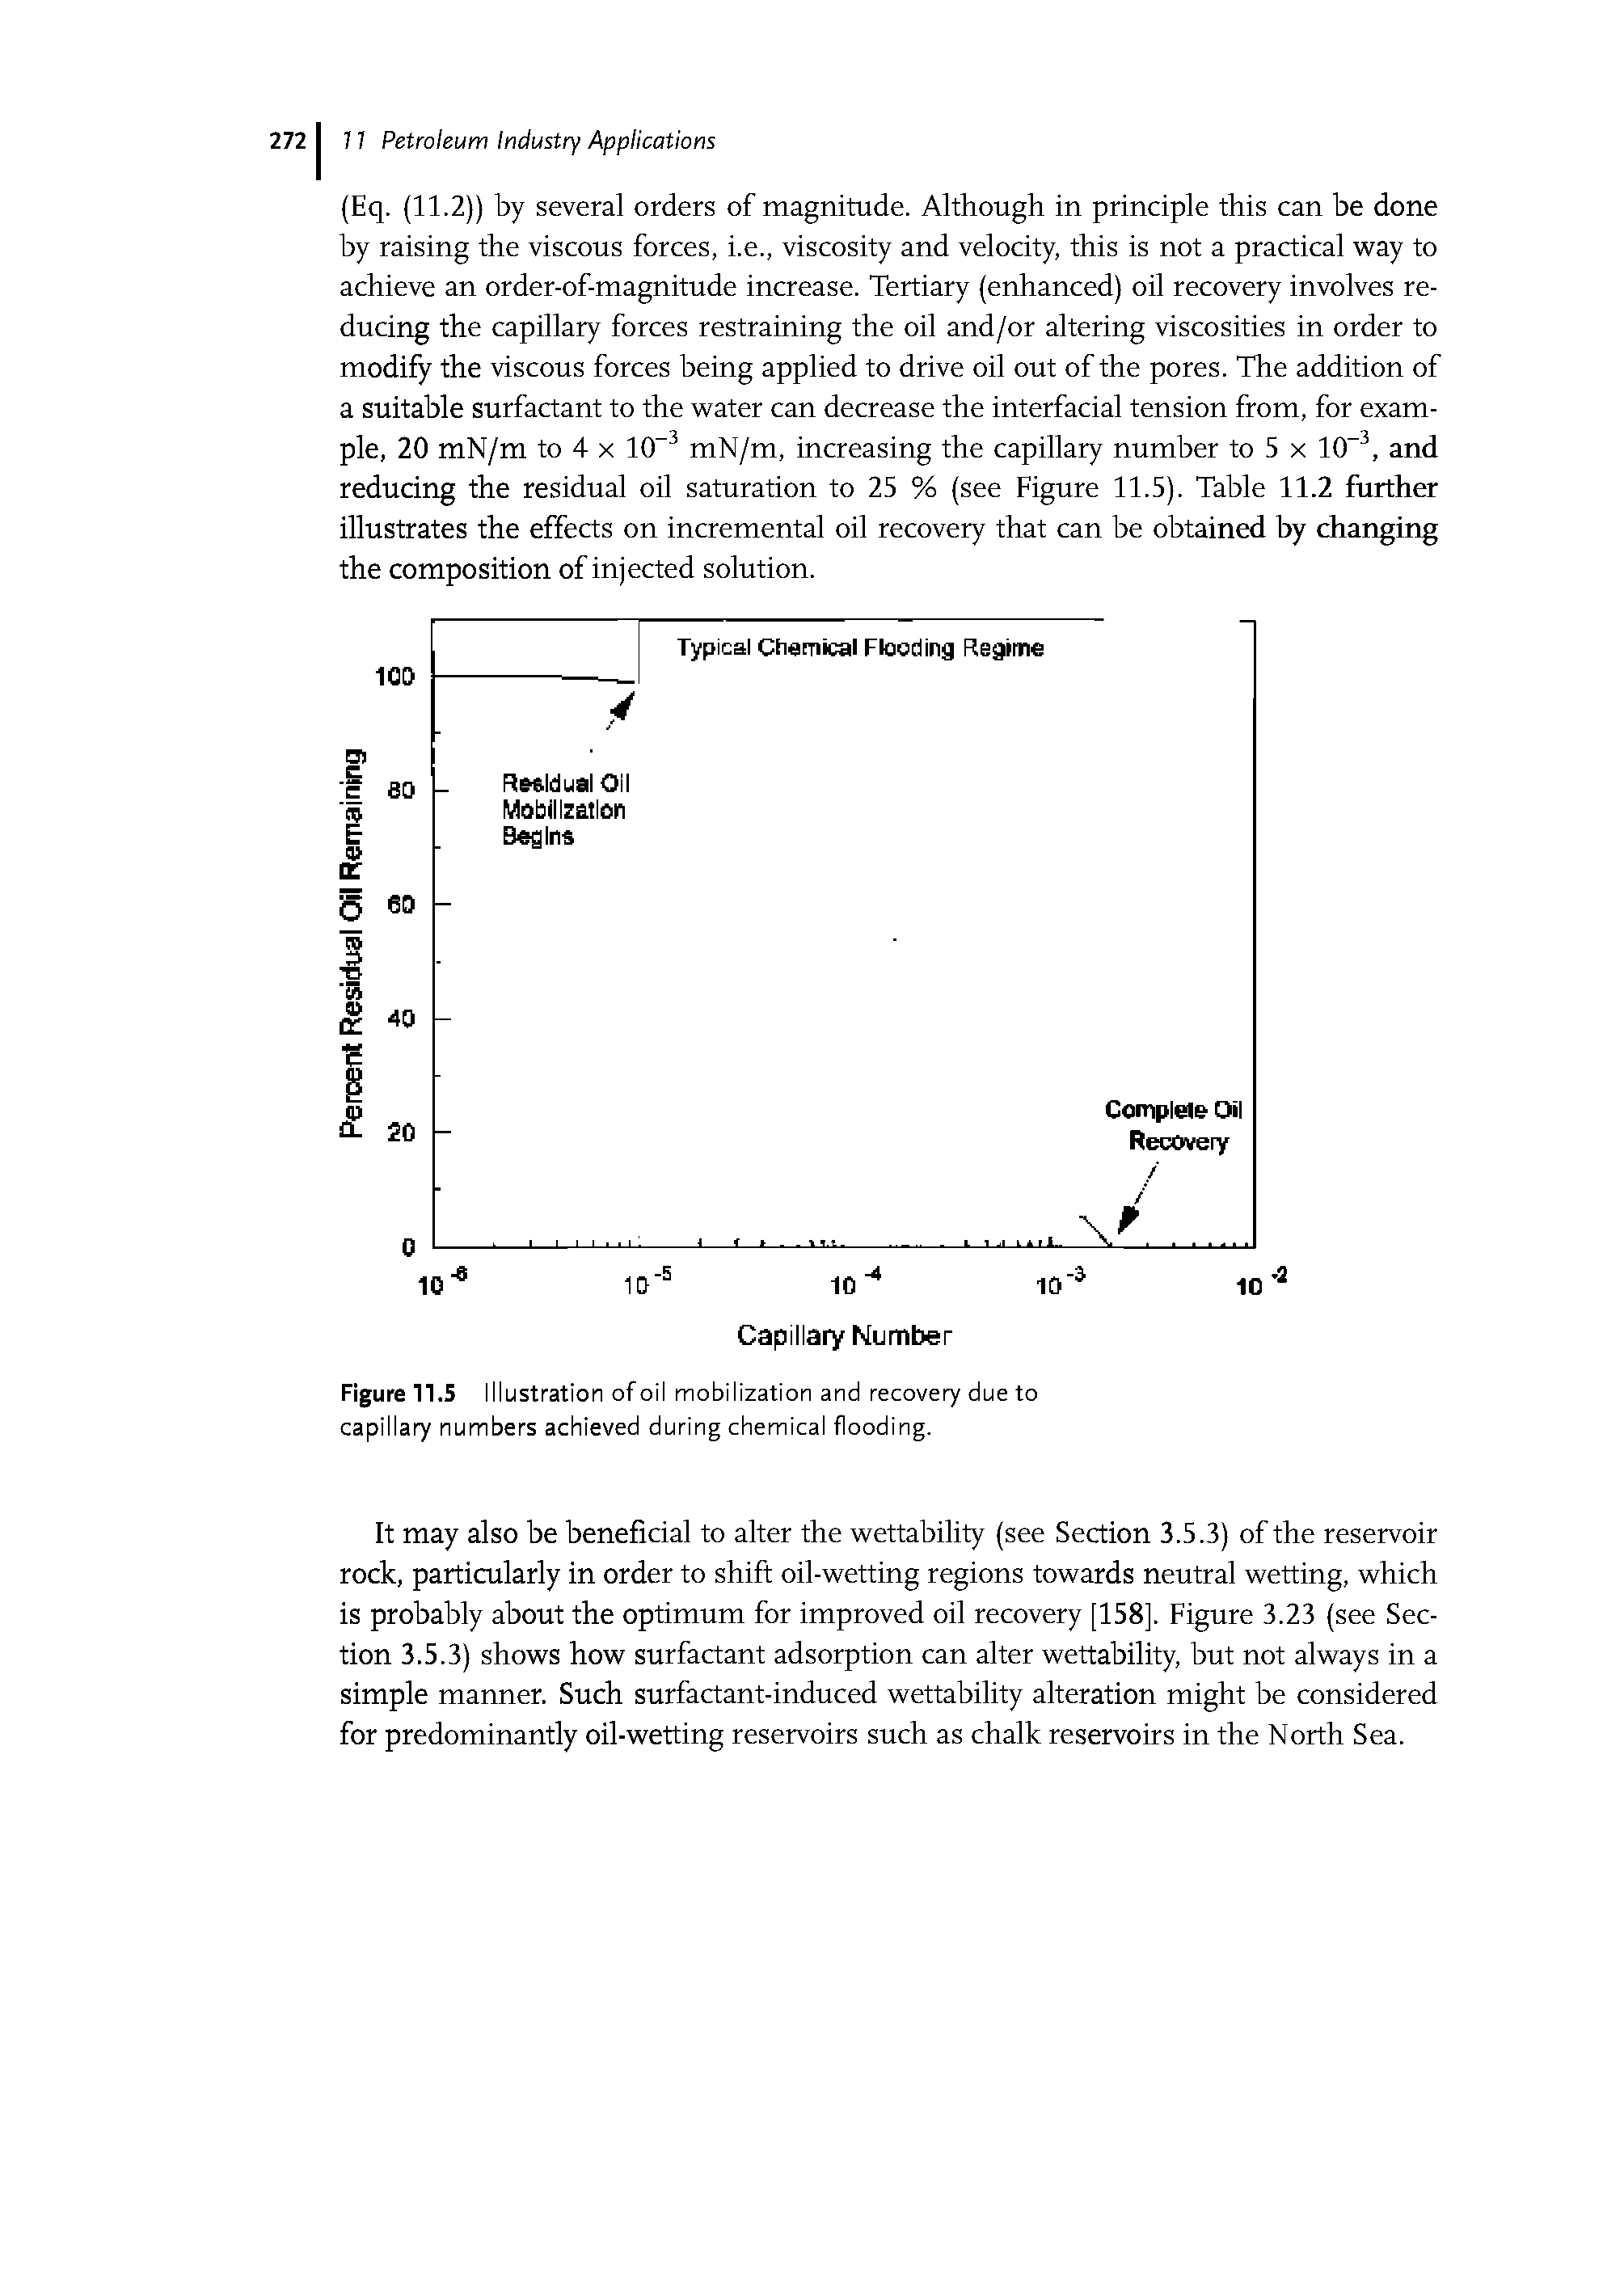 Figure 11. S Illustration of oil mobilization and recovery due to capillary numbers achieved during chemical flooding.